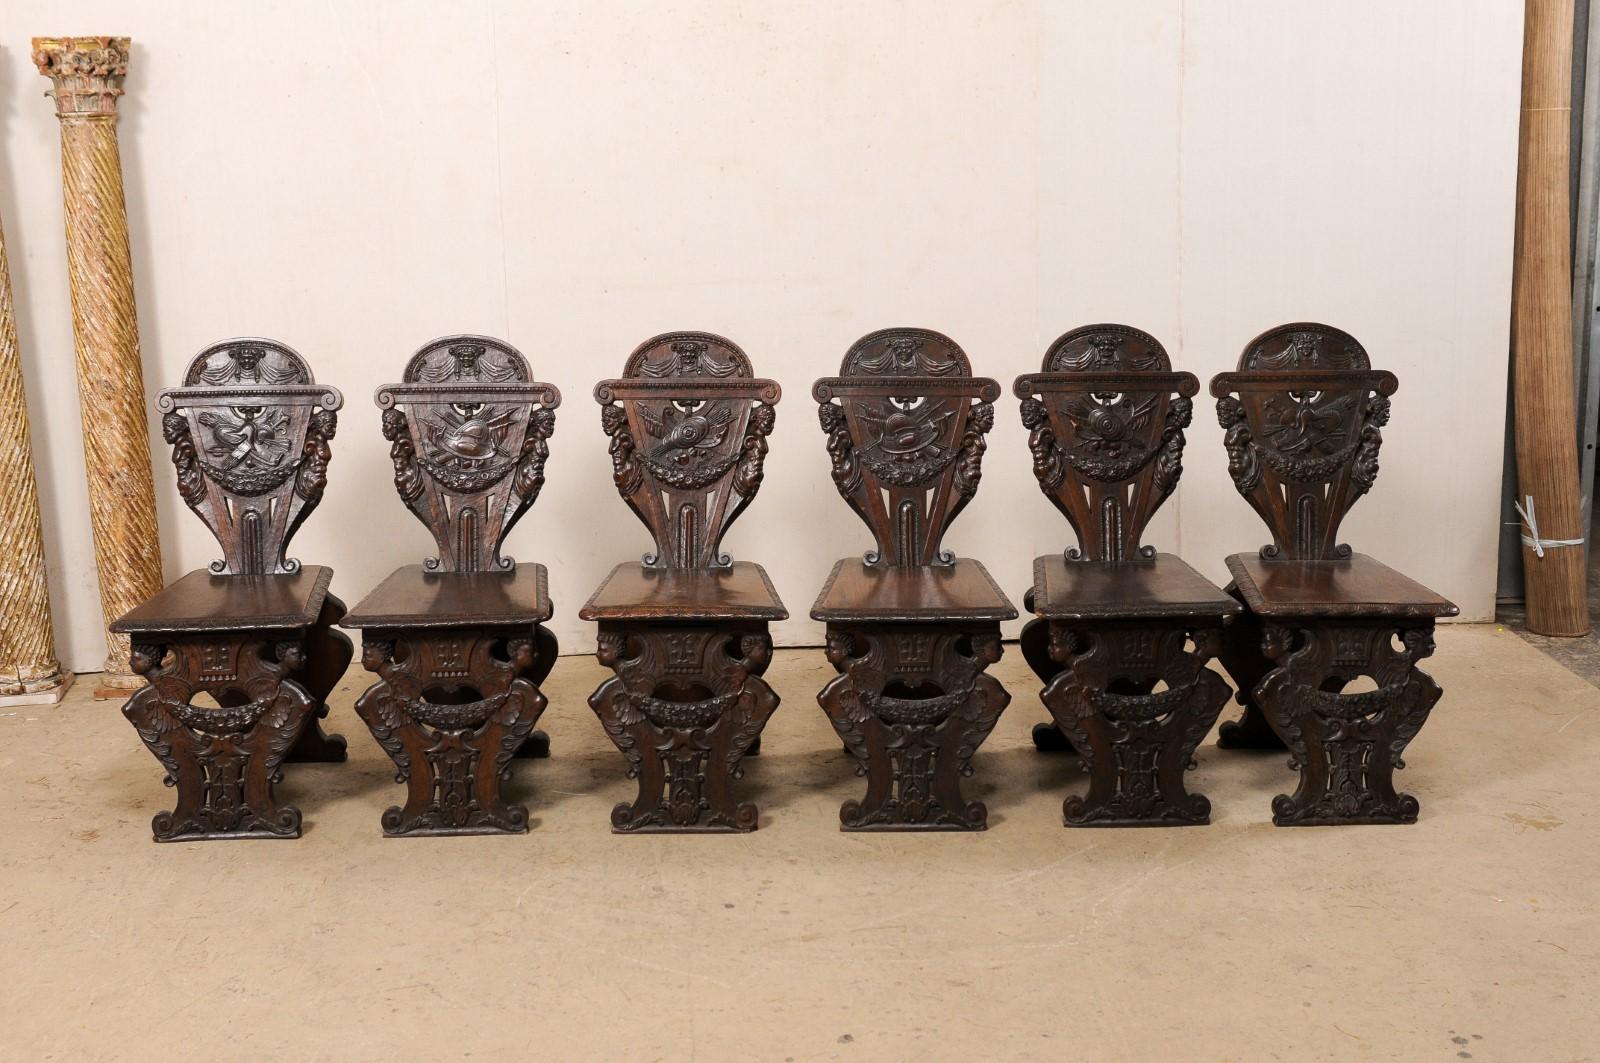 Set of 6 English Renaissance Ornately-Carved Hall Chairs, Turn of 19th & 20th C In Good Condition For Sale In Atlanta, GA